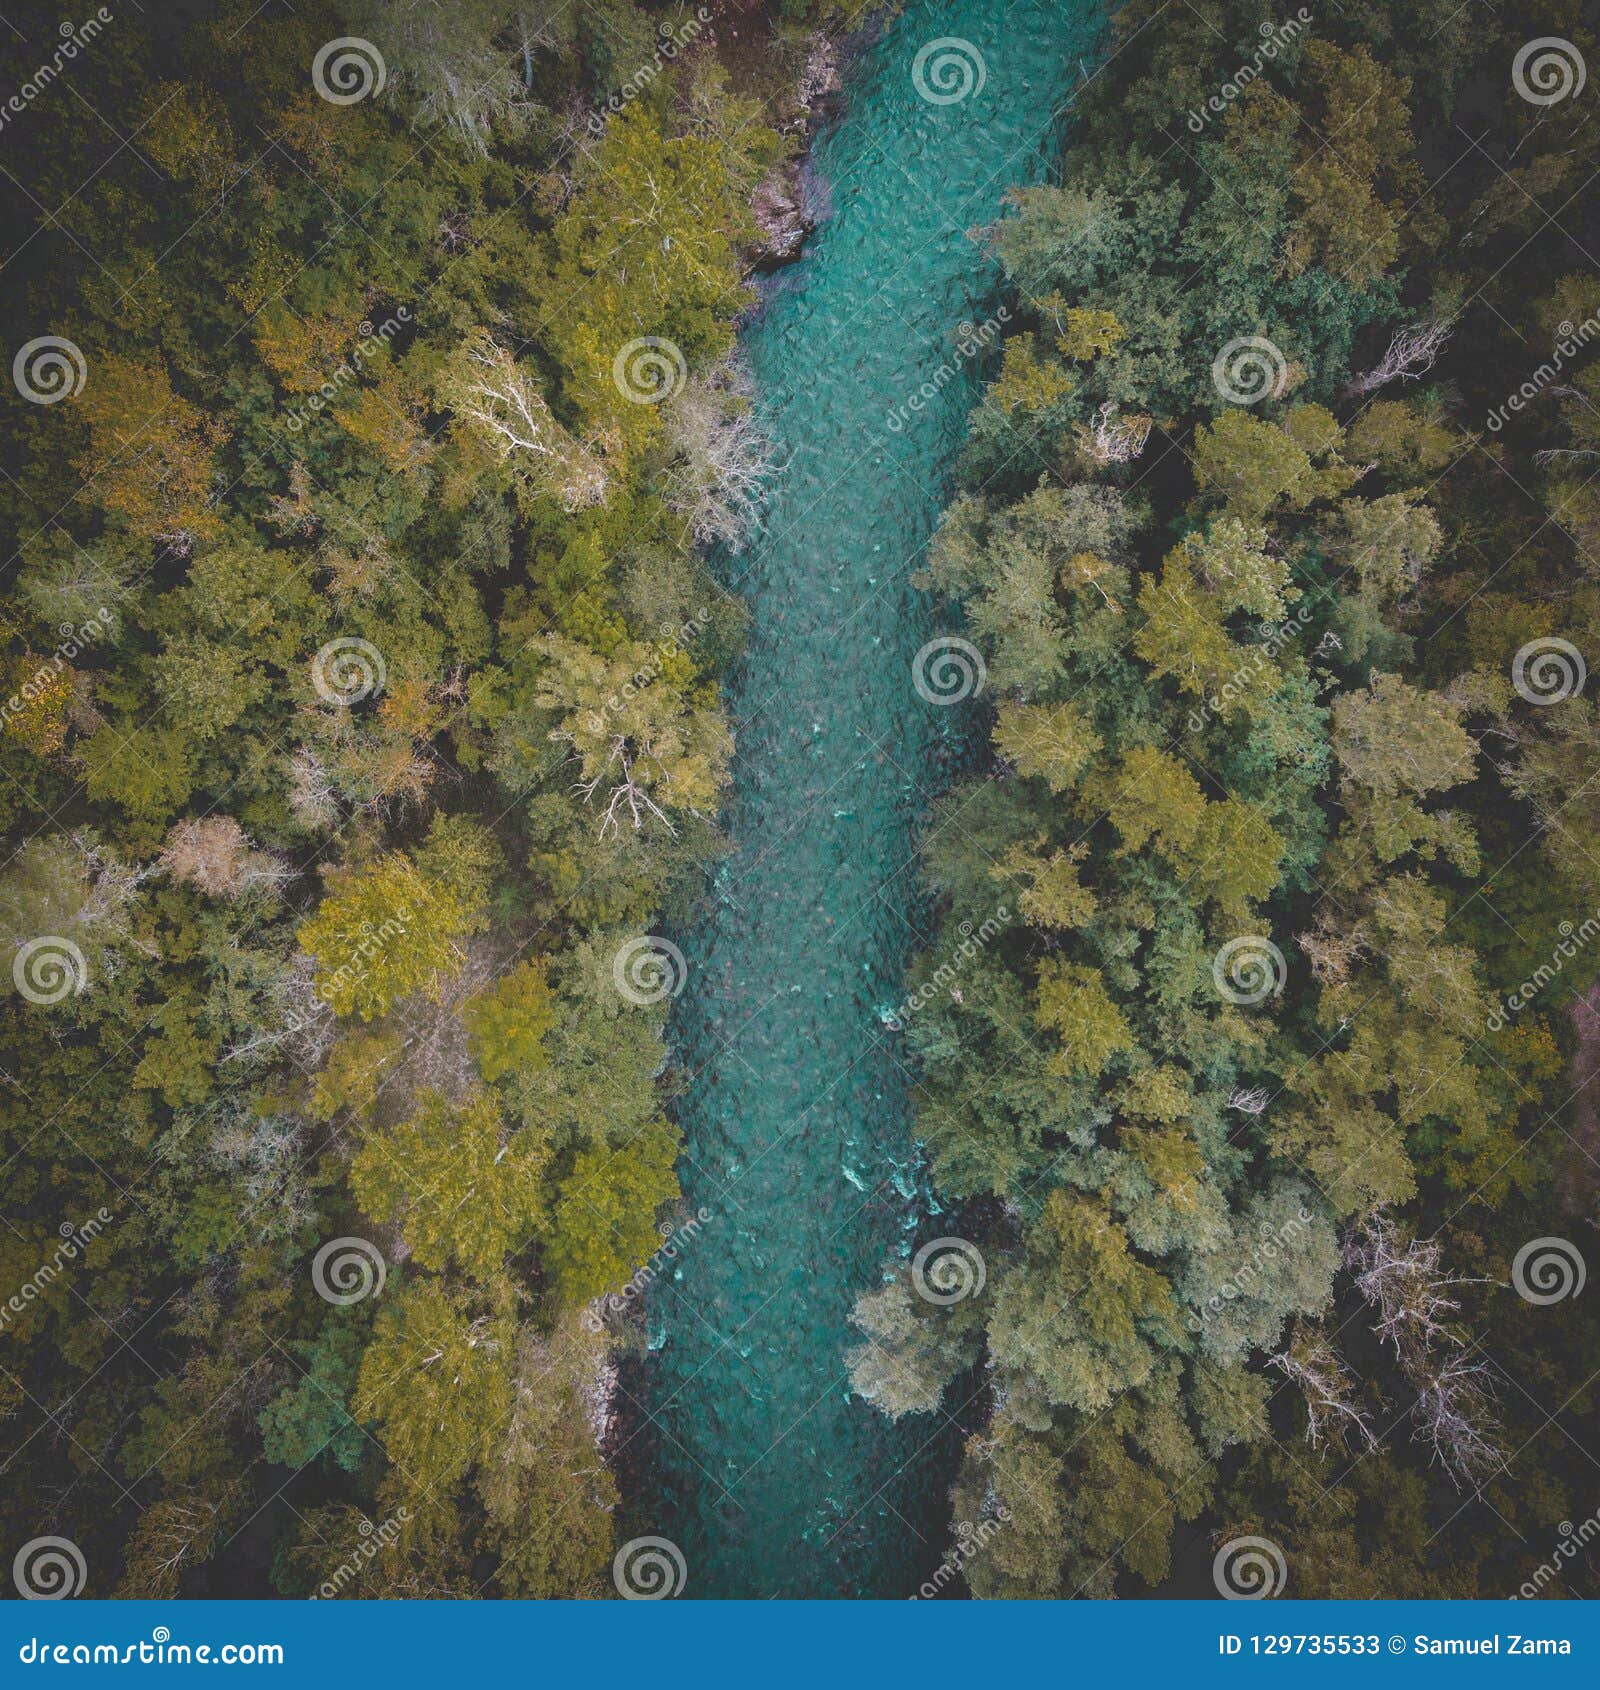 River drone and green image. Image of green - 129735533